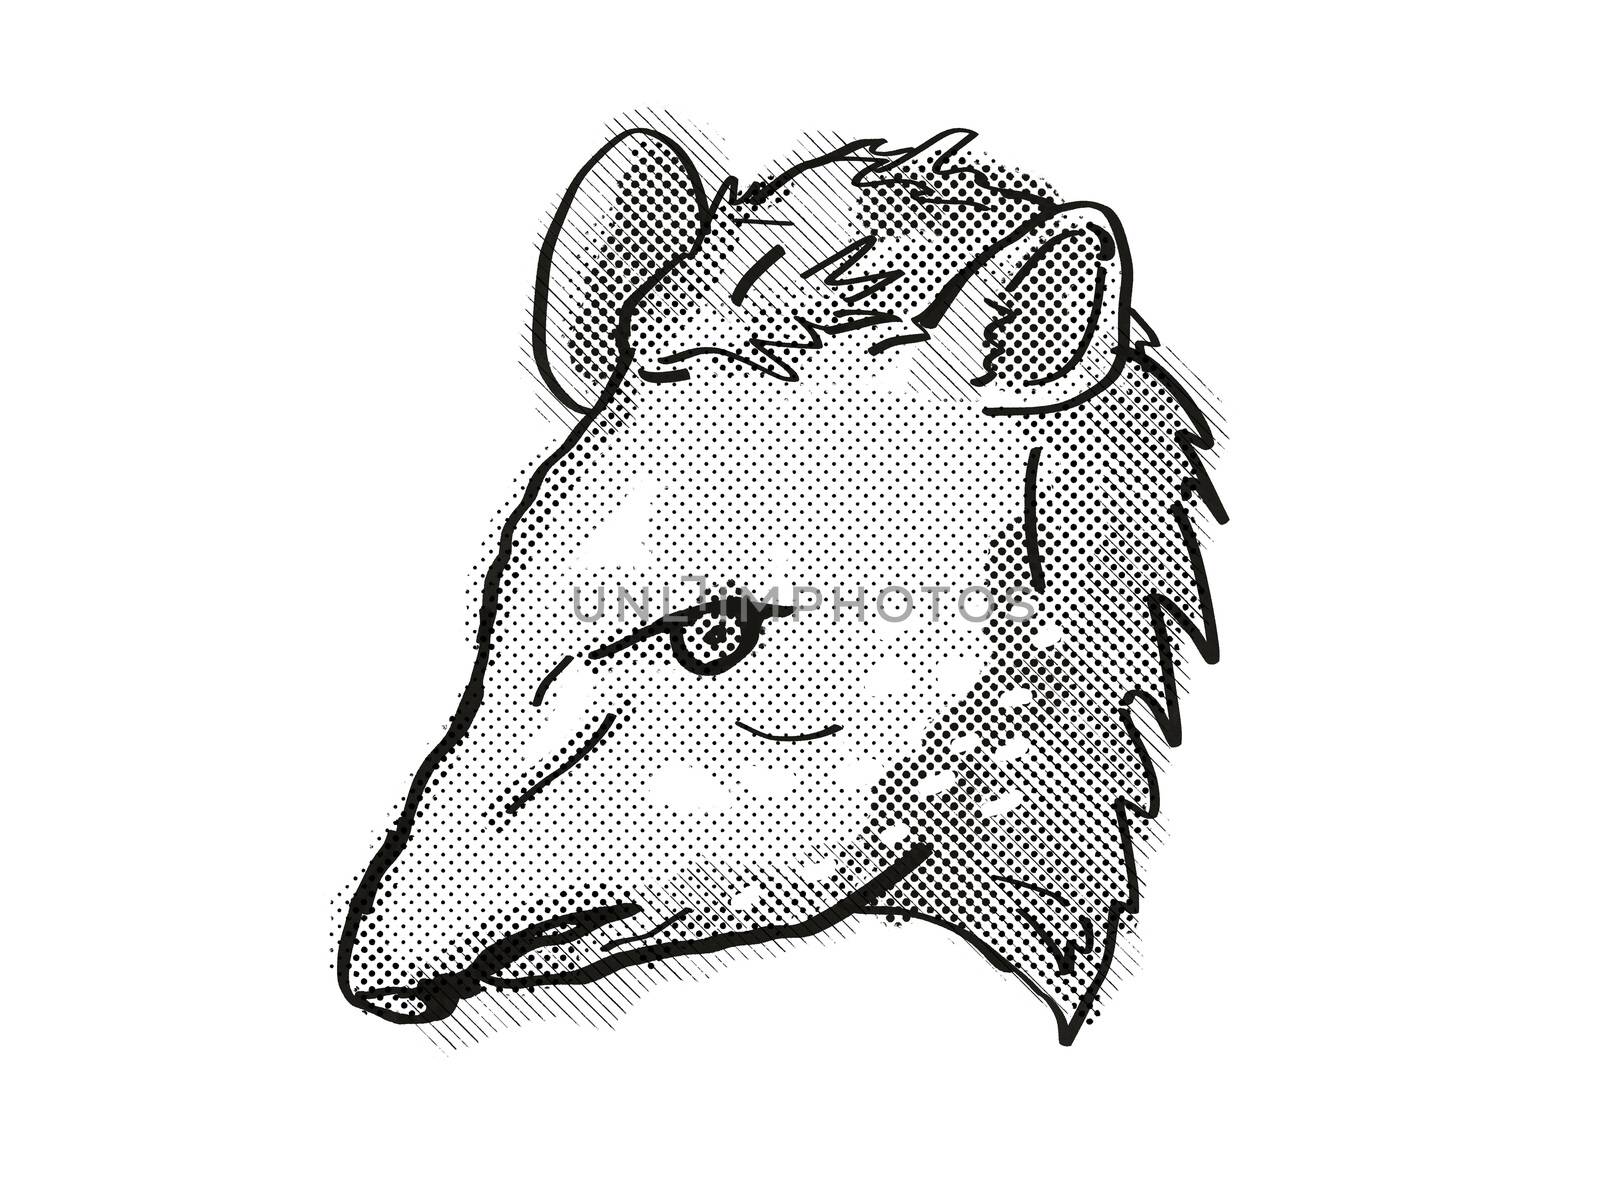 Retro cartoon style drawing of head of a tapir, a large mammal with pig-like appearance and an endangered wildlife species on isolated white background done in black and white.